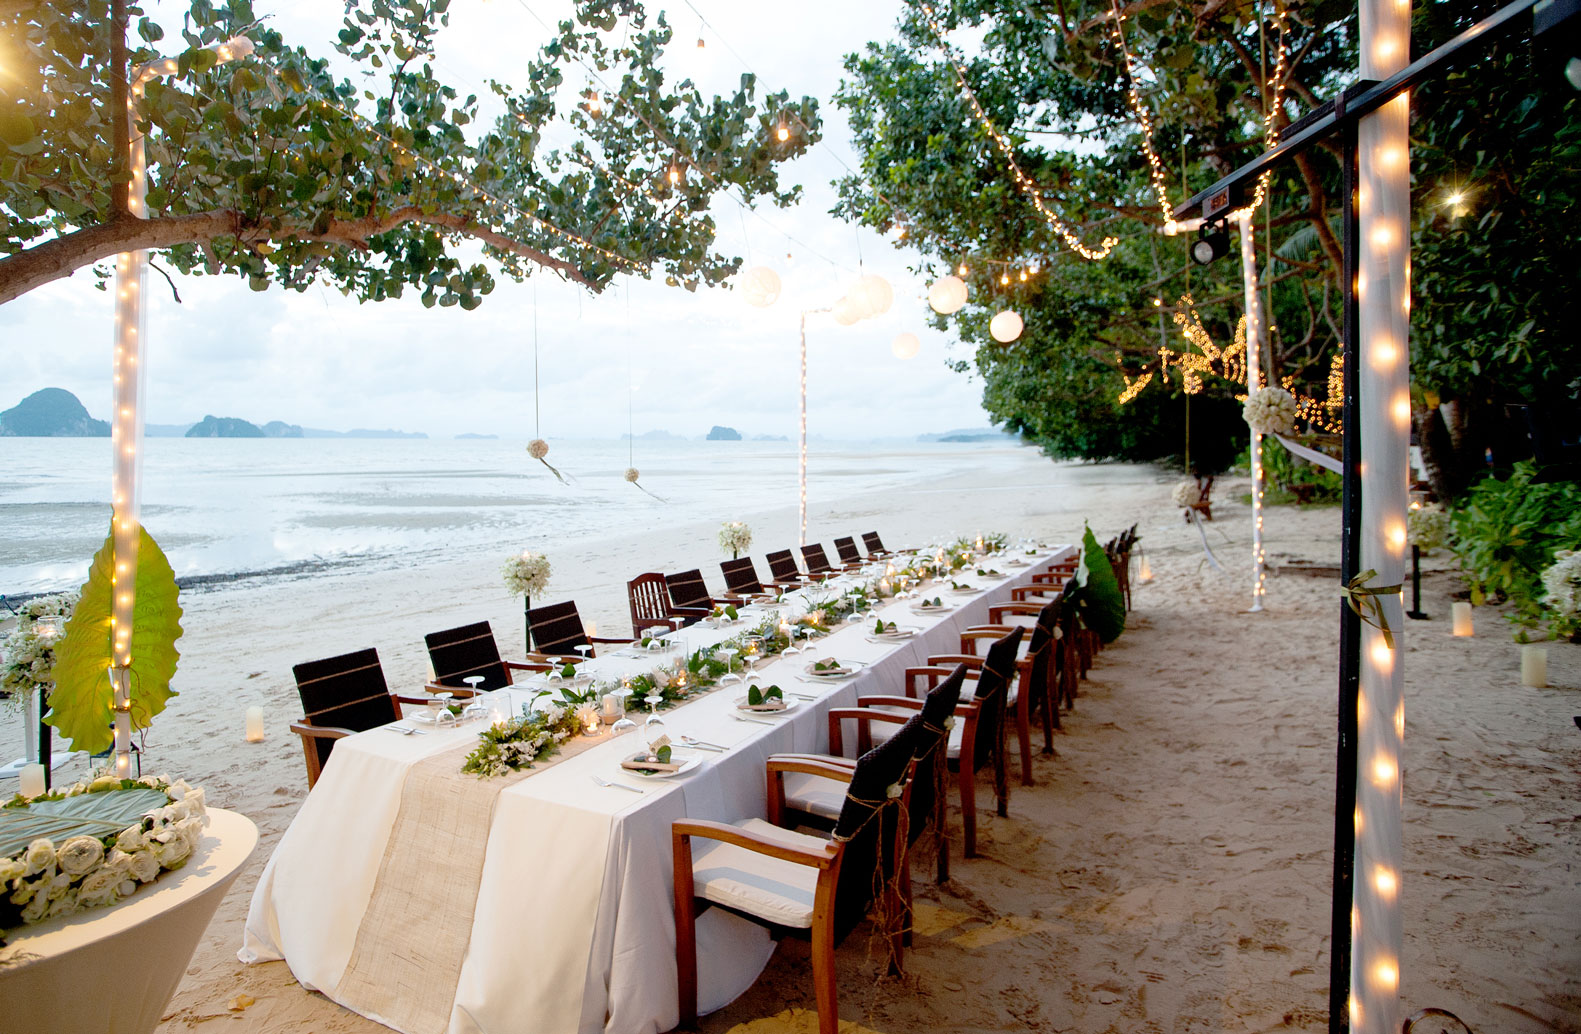 7 Luxurious Beach Wedding Locations for Tasteful Couples